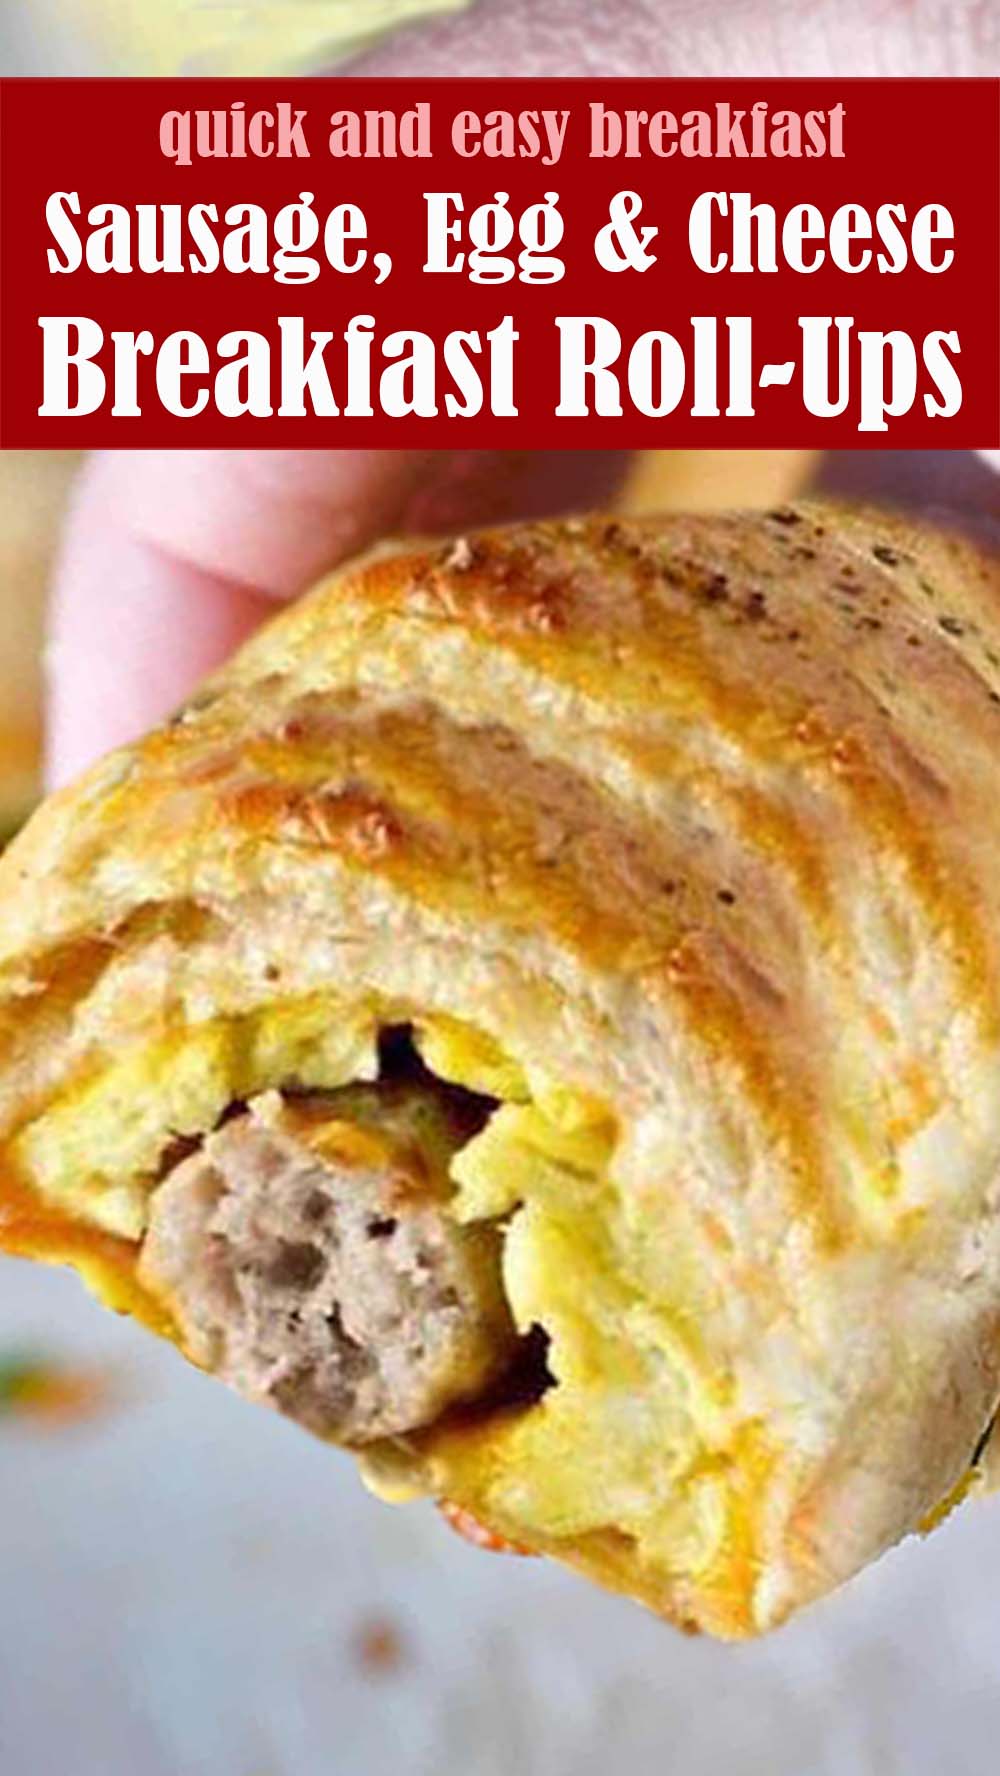 Sausage, Egg and Cheese Breakfast Roll-Ups Recipe